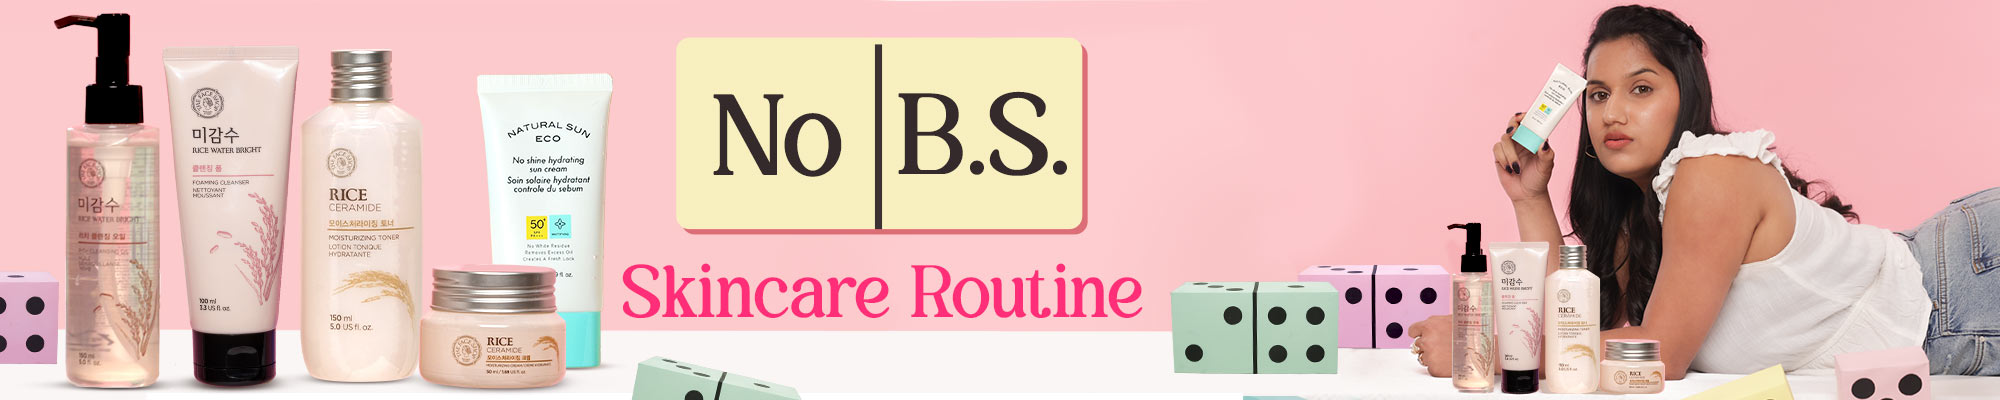 No B.S. Routine (Everyday skincare routine products)